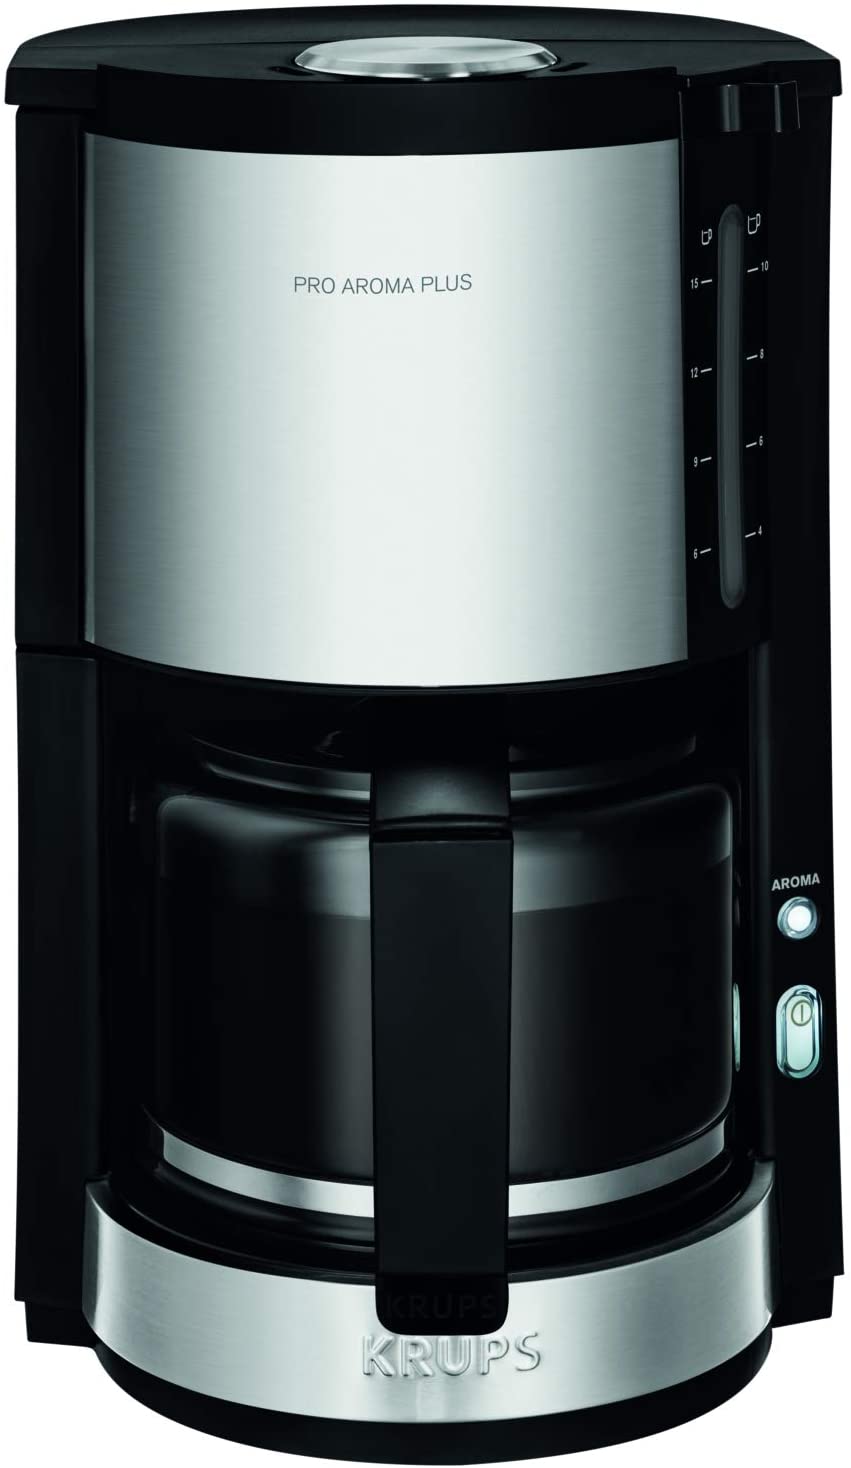 Krups KM321 Proaroma Plus Glass Coffee Maker, 10 Cups, 1100 W, Modern Design, Black with Stainless Steel Applique